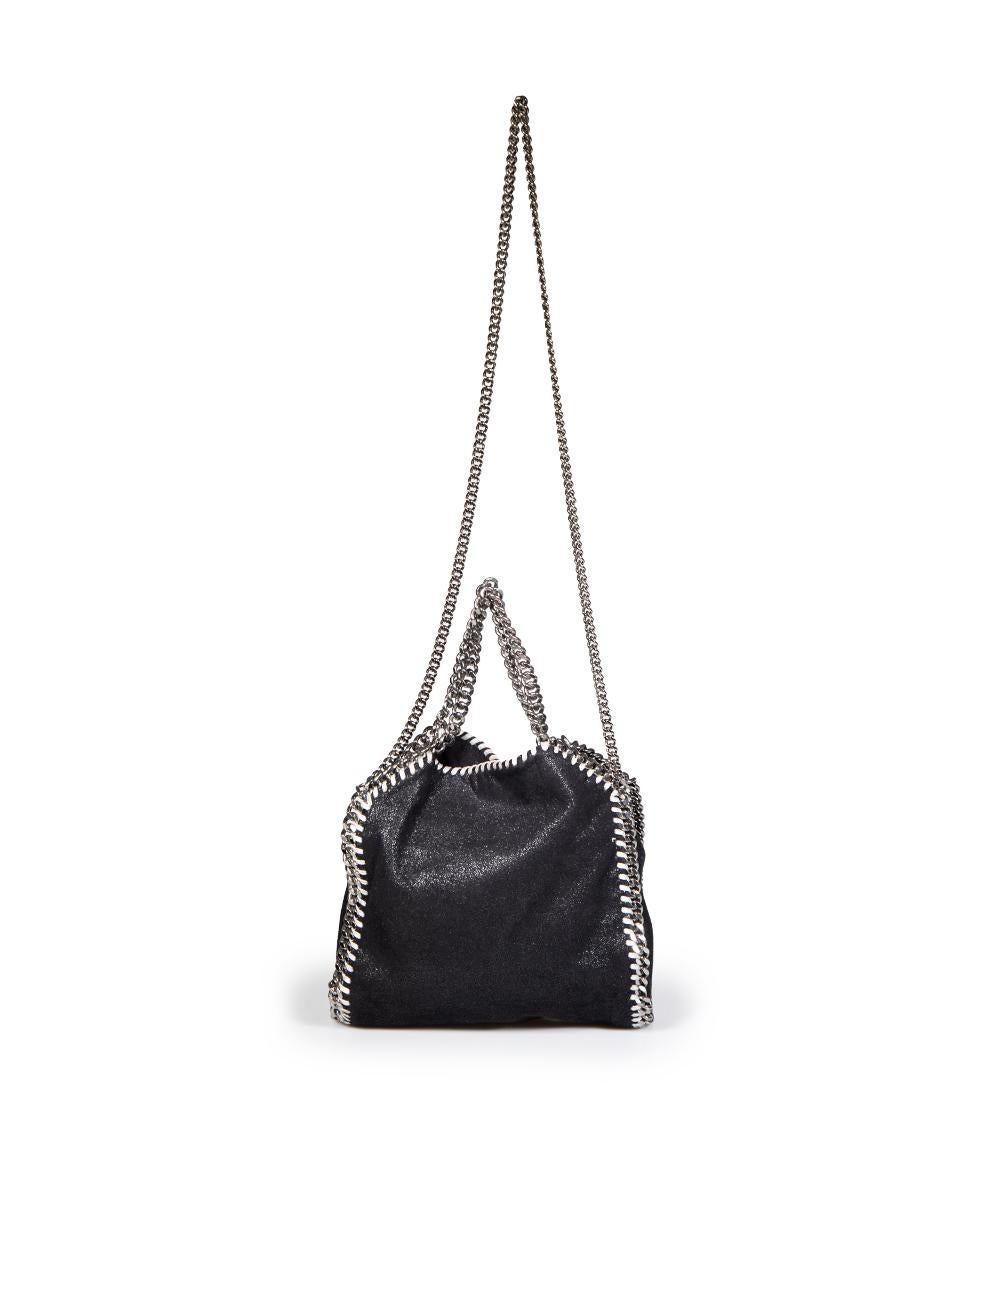 Stella McCartney Black Faux Suede Falabella Tote In Excellent Condition For Sale In London, GB